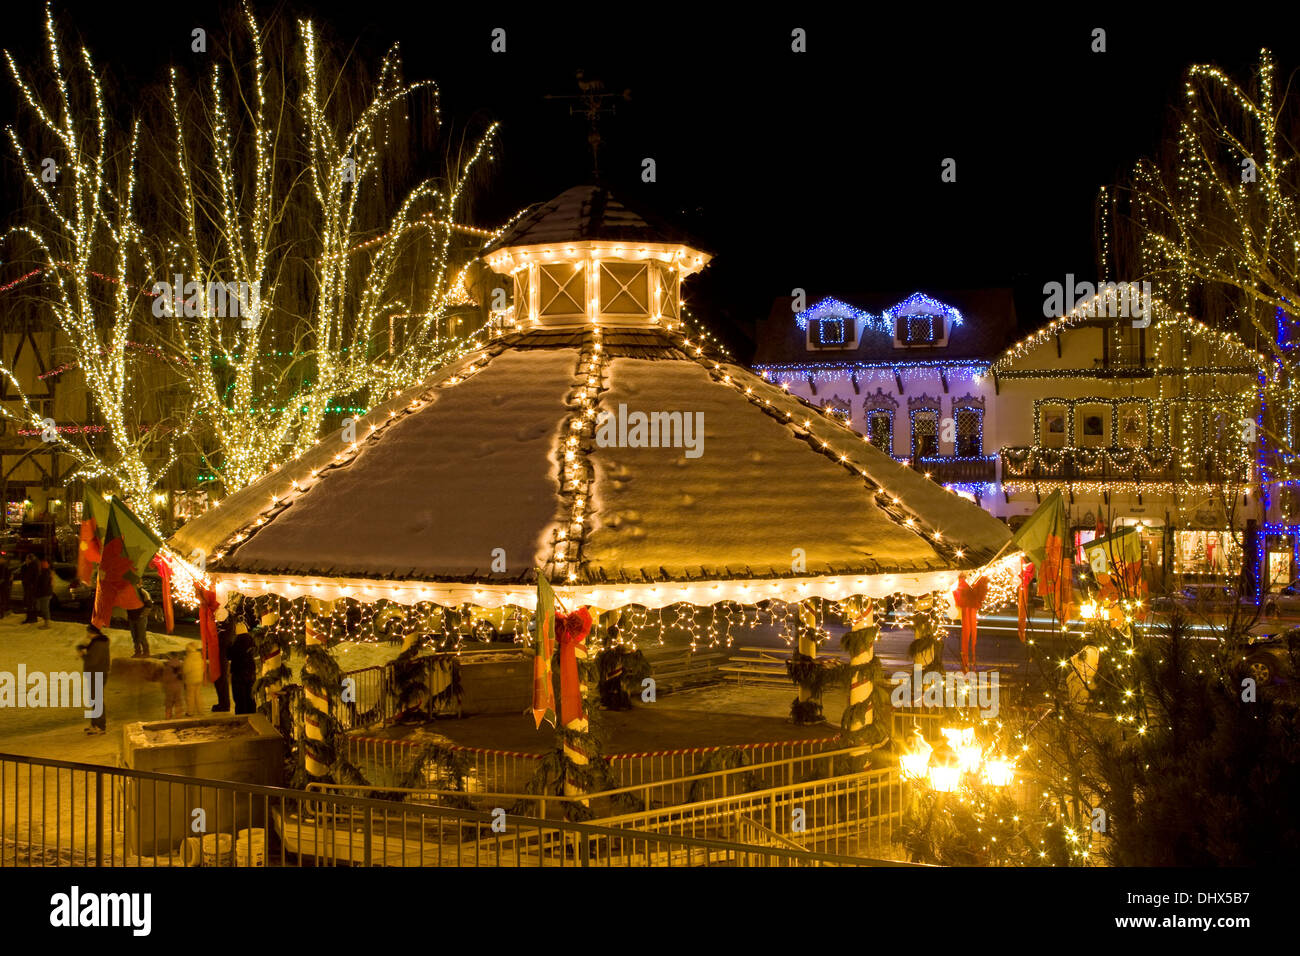 The town of Leavenworth decorated with Christmas lights for the holiday season, Washington. Stock Photo